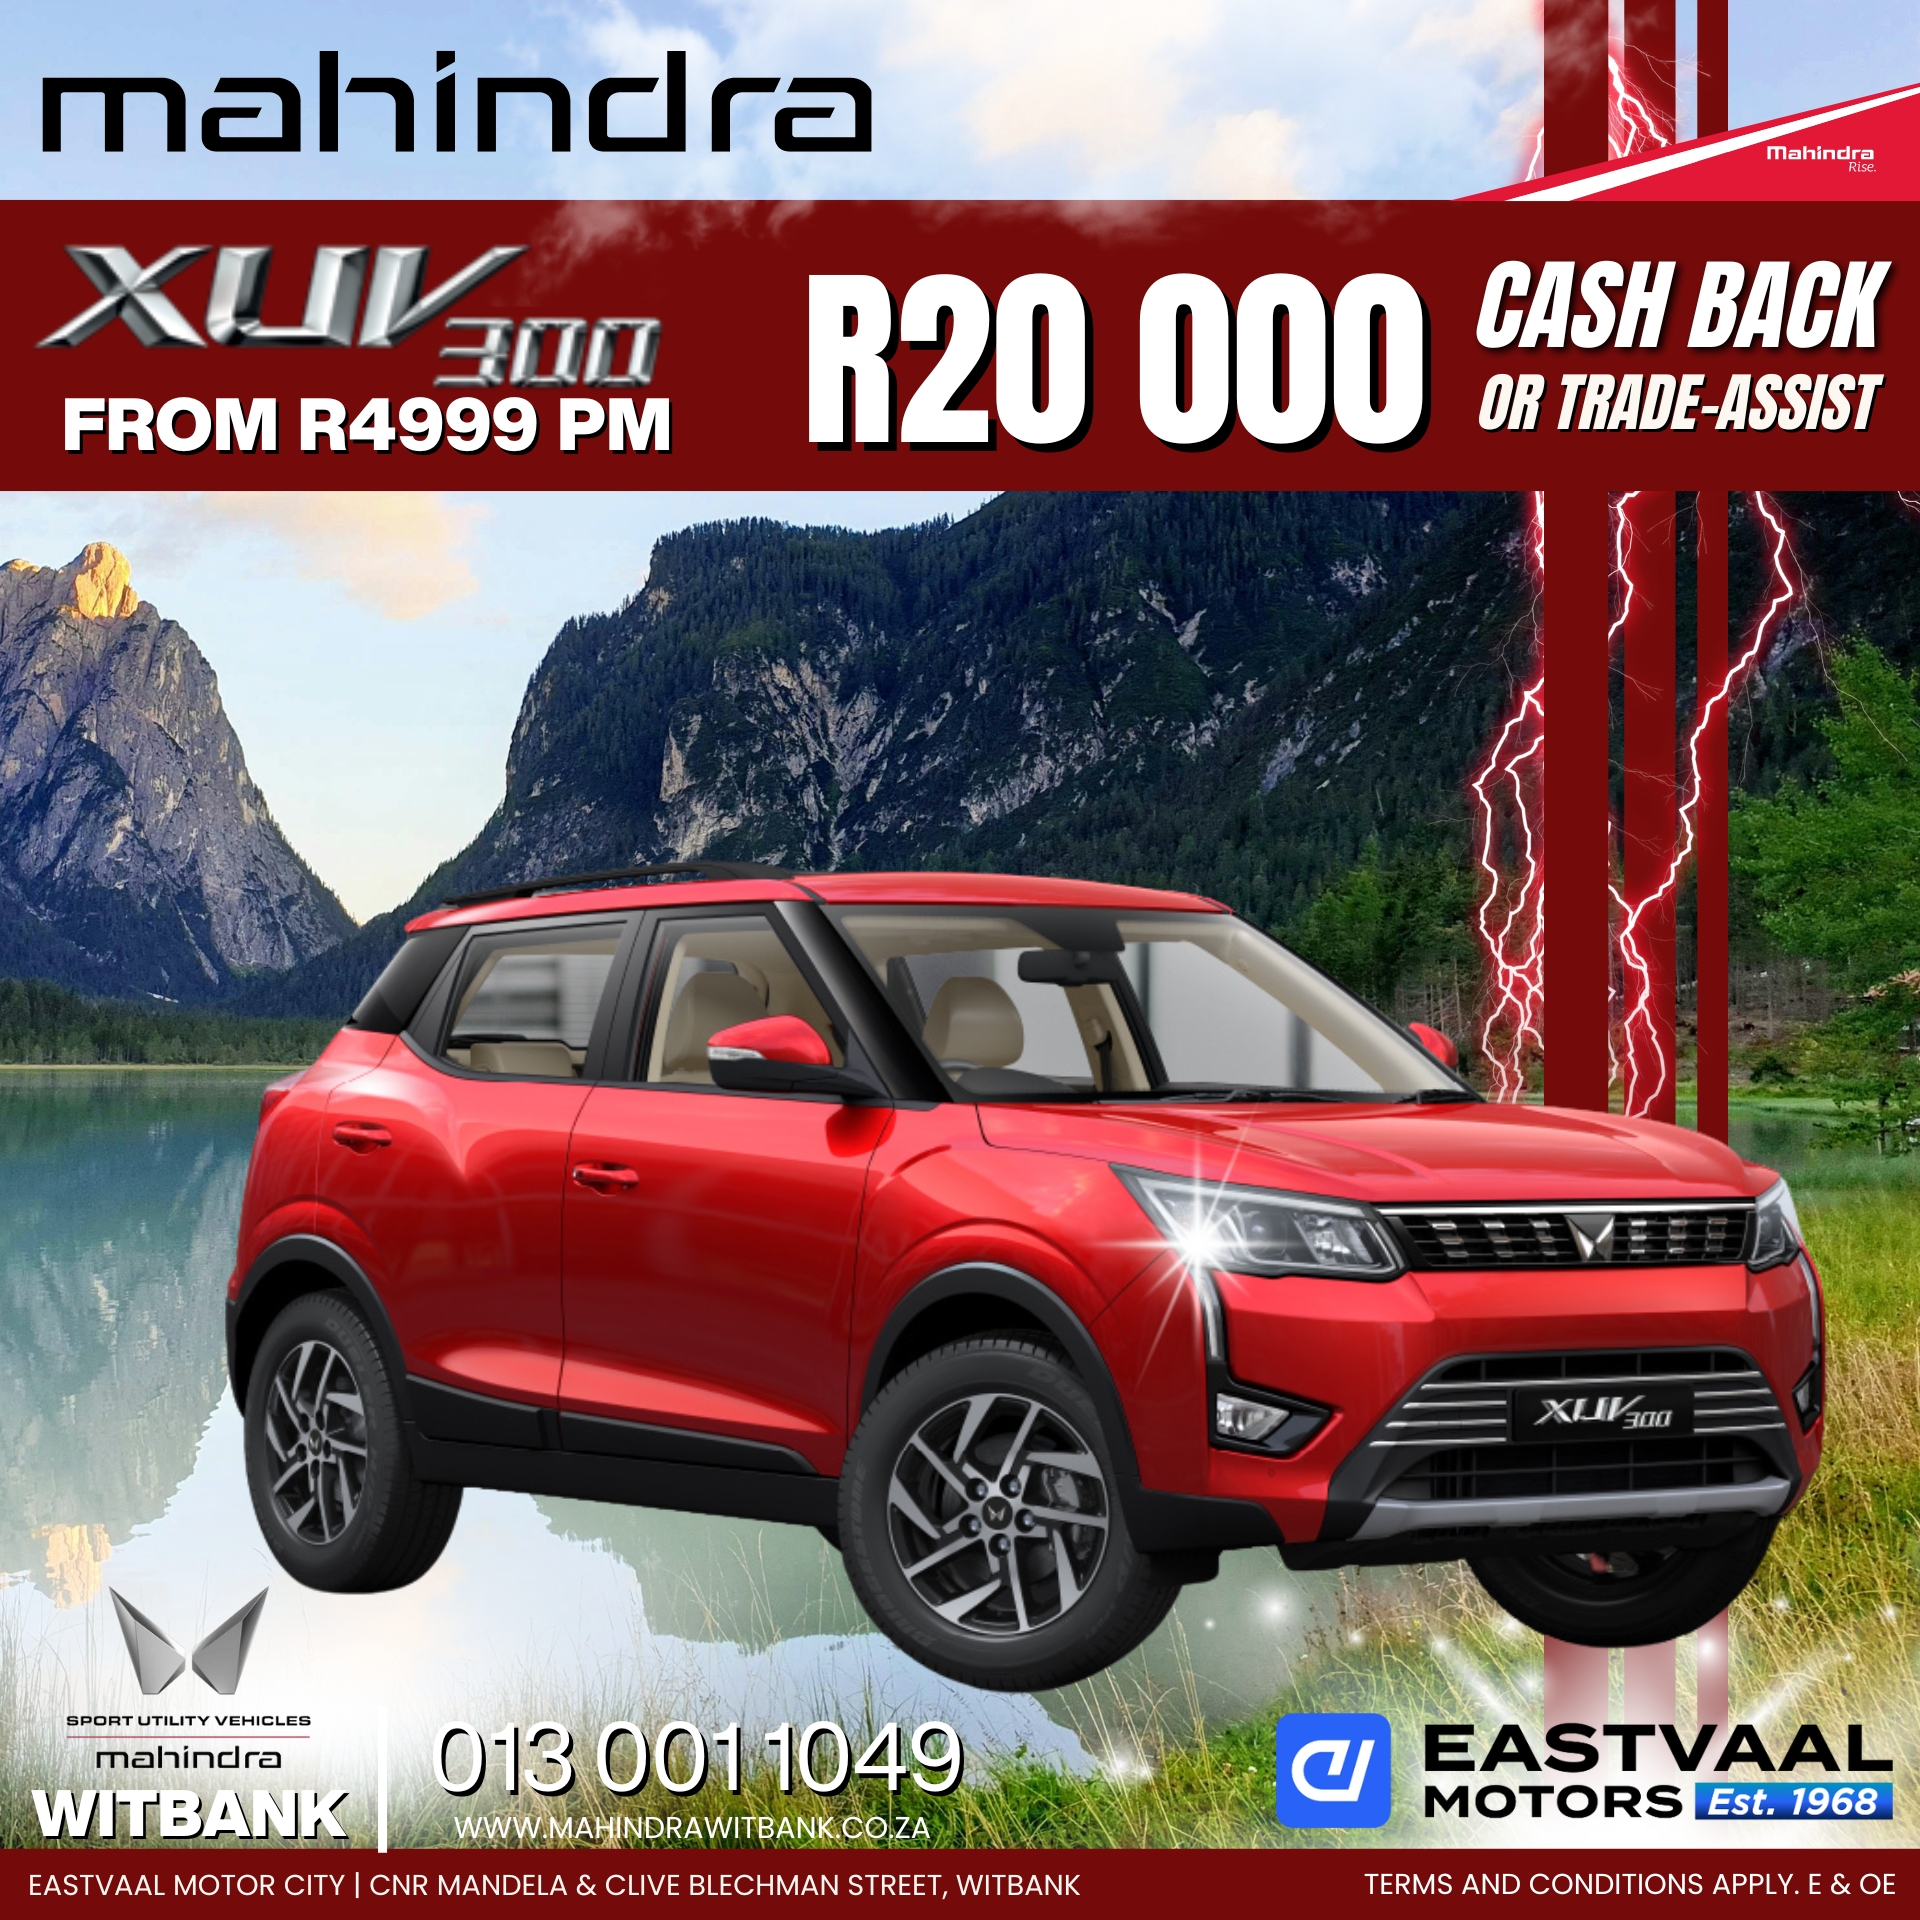 Drive into July with unbeatable deals on Mahindra vehicles at Eastvaal Motor City! image from 